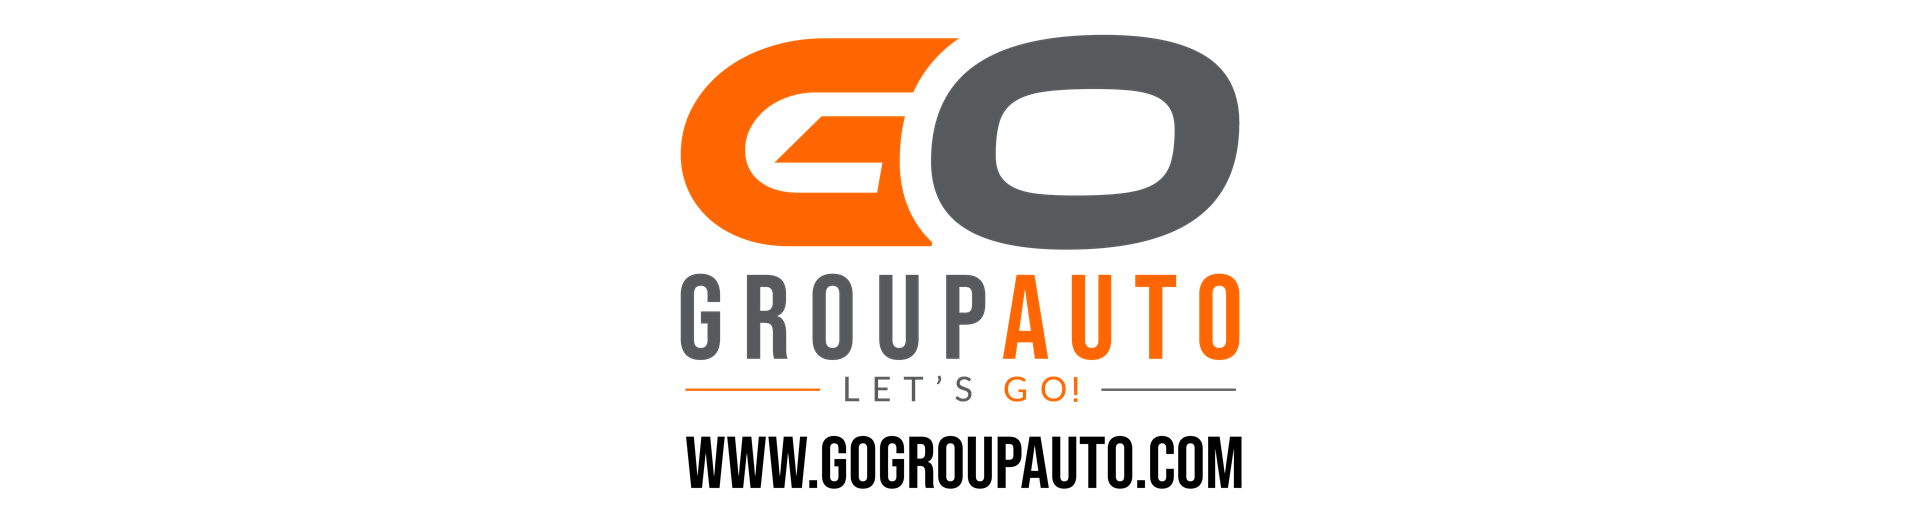 Welcome Go Group Auto